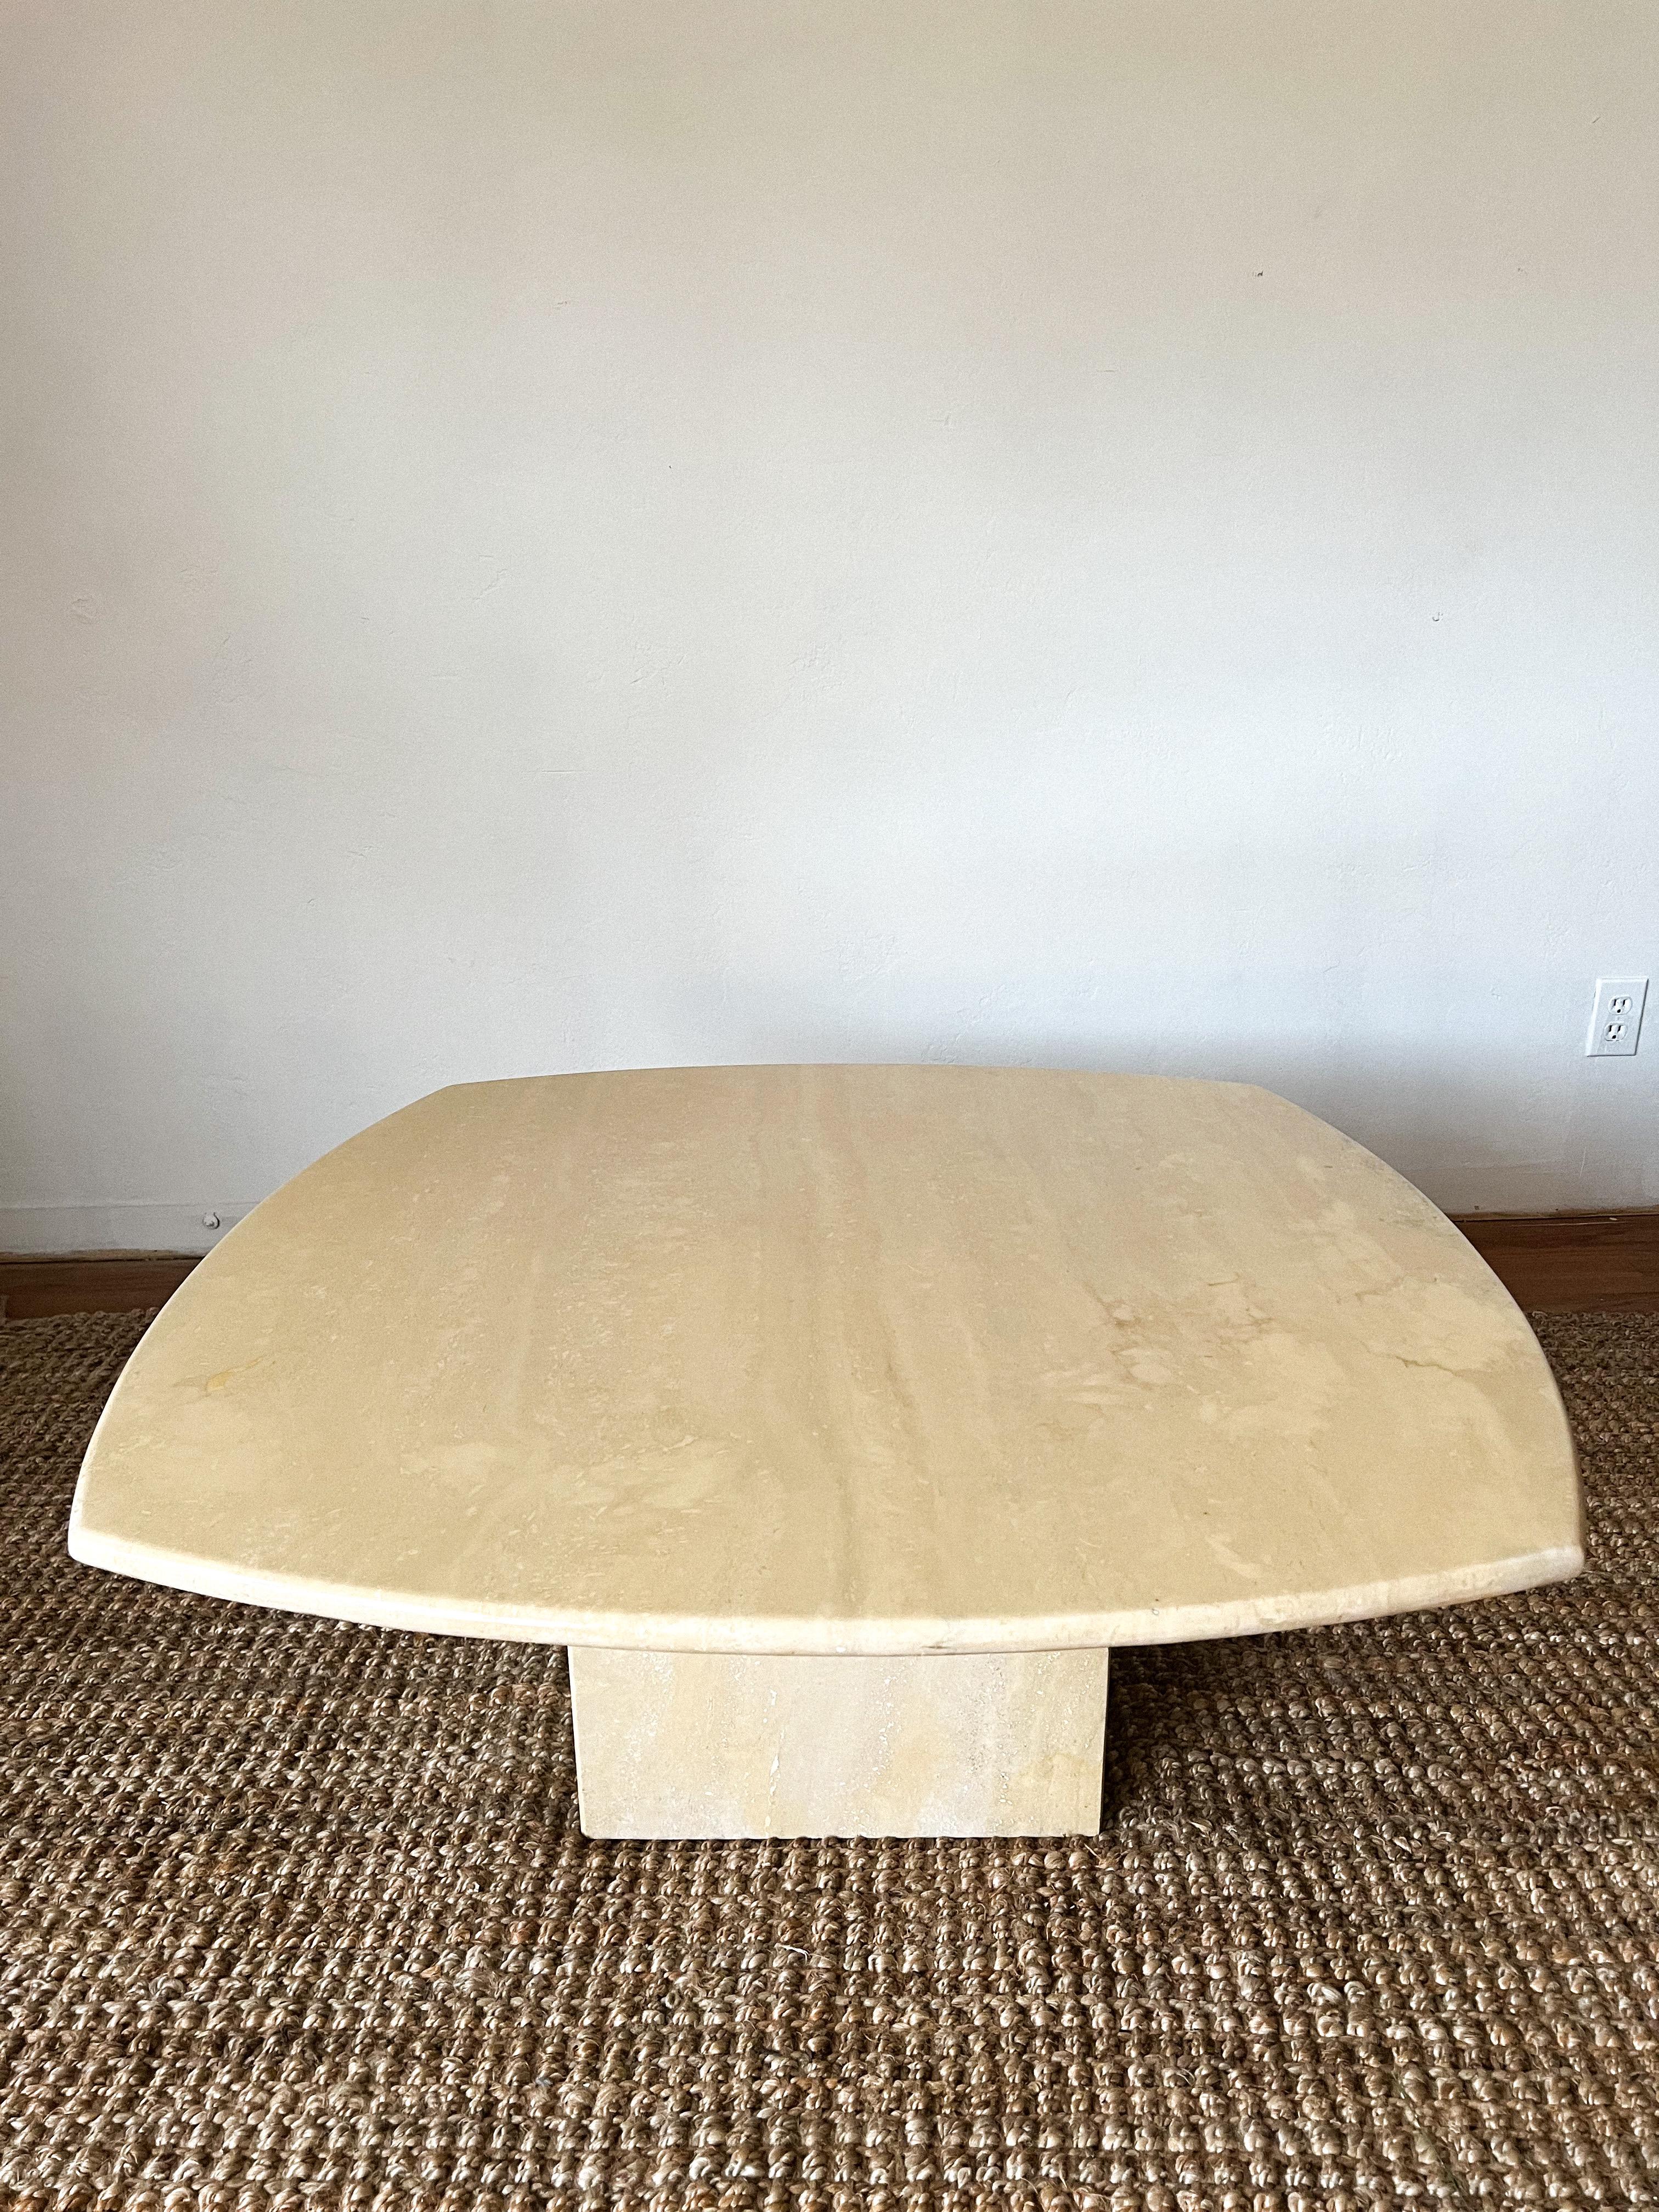 A mid century modern square polished Italian travertine coffee table with rounded edges. Table is polished and features a clean edge. Very postmodern and minimalist.